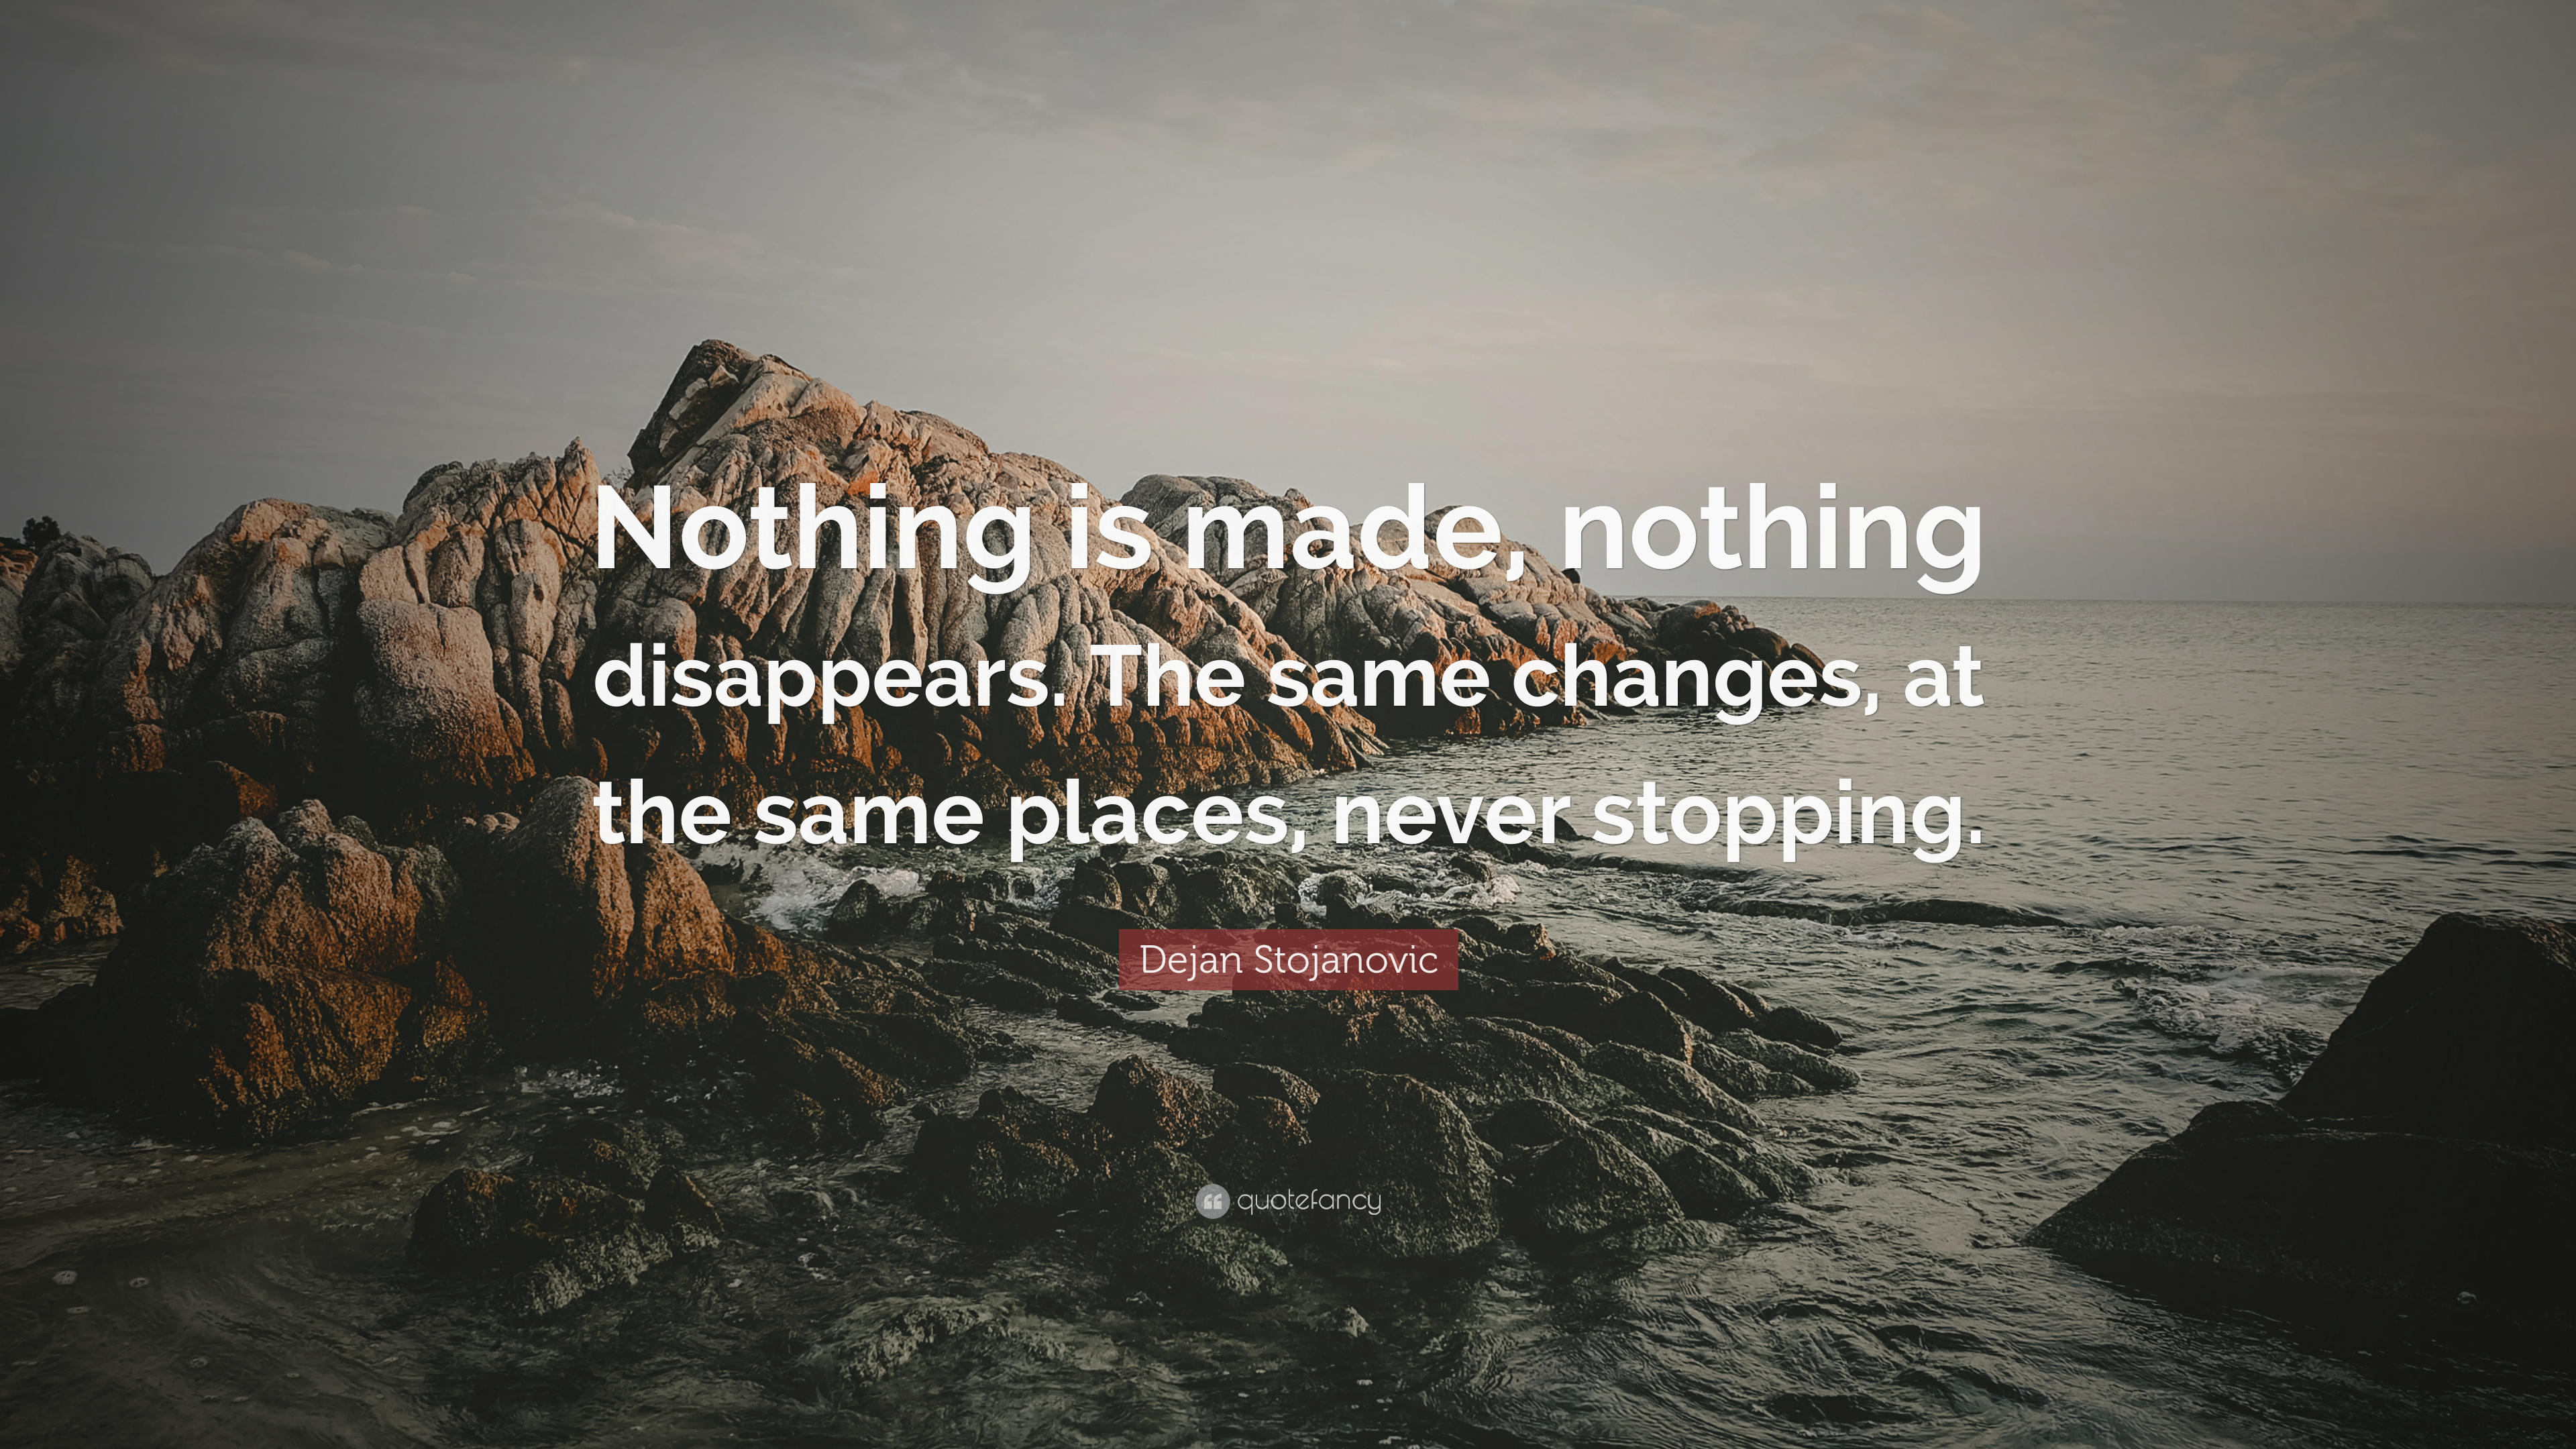 Dejan Stojanovic Quote: “Nothing is made, nothing disappears. The ...